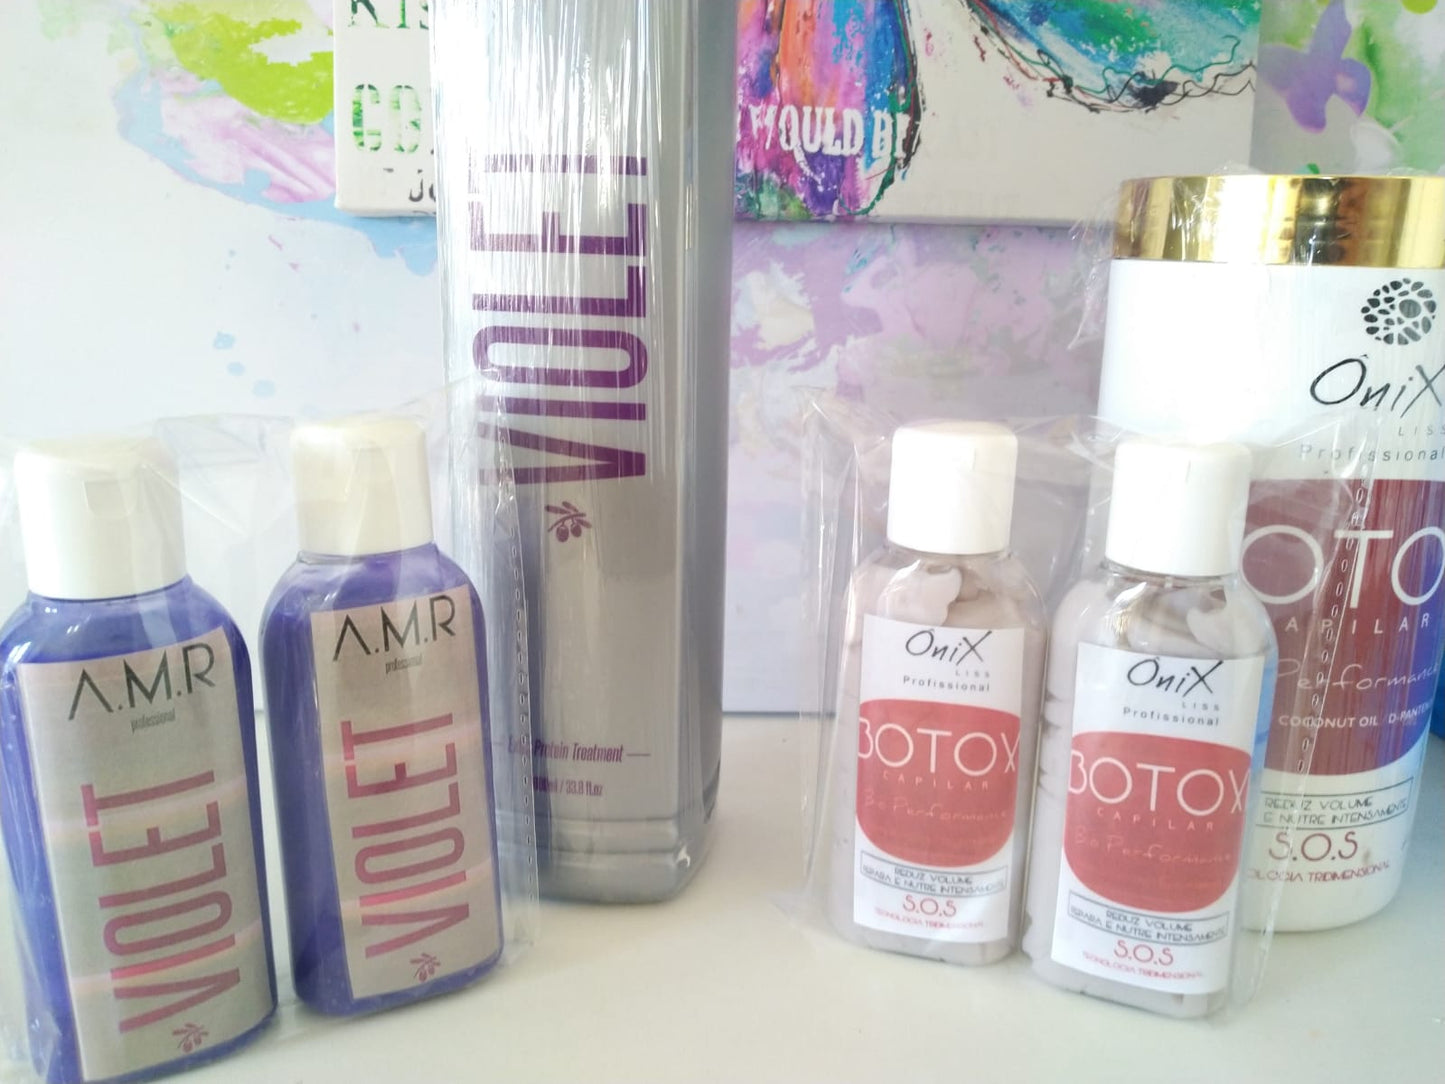 Lissage AMR Violet & Botox Onix Liss 2x200ml